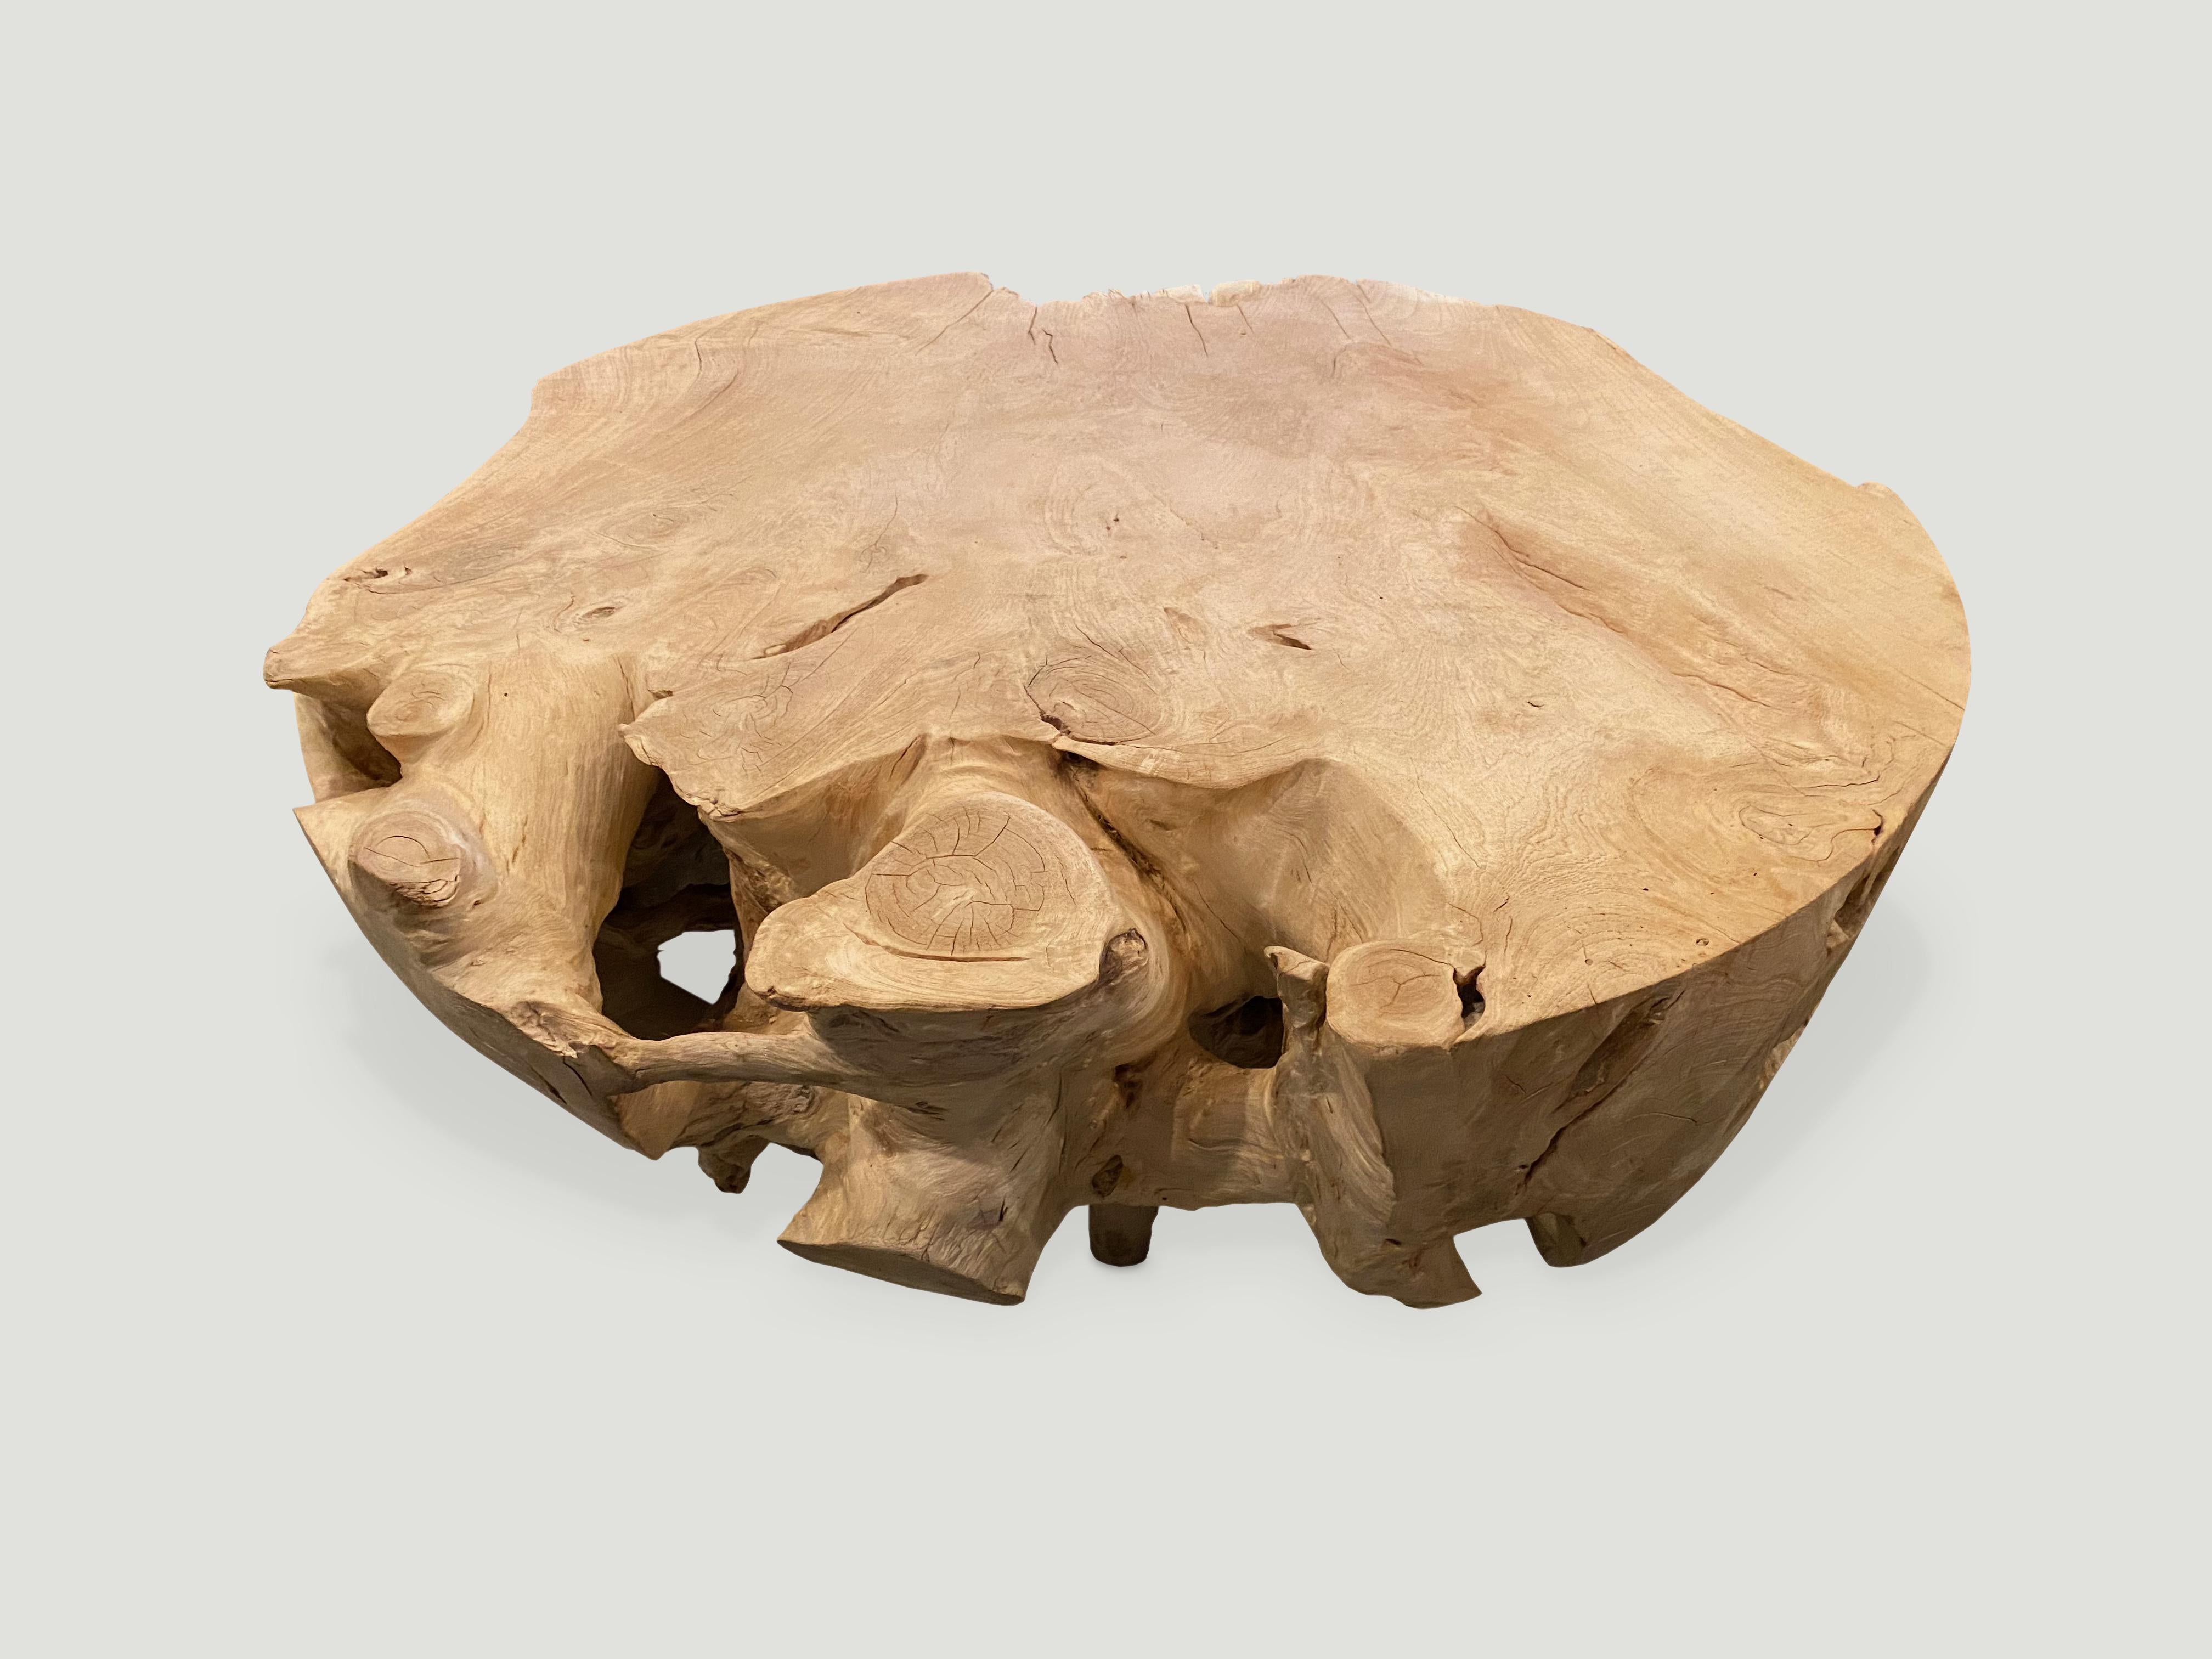 Organic round reclaimed bleached teak wood coffee table. Perfect for inside or outside living.

The St. Barts collection features an exciting new line of organic white wash and natural weathered teak furniture. The reclaimed teak is bleached and